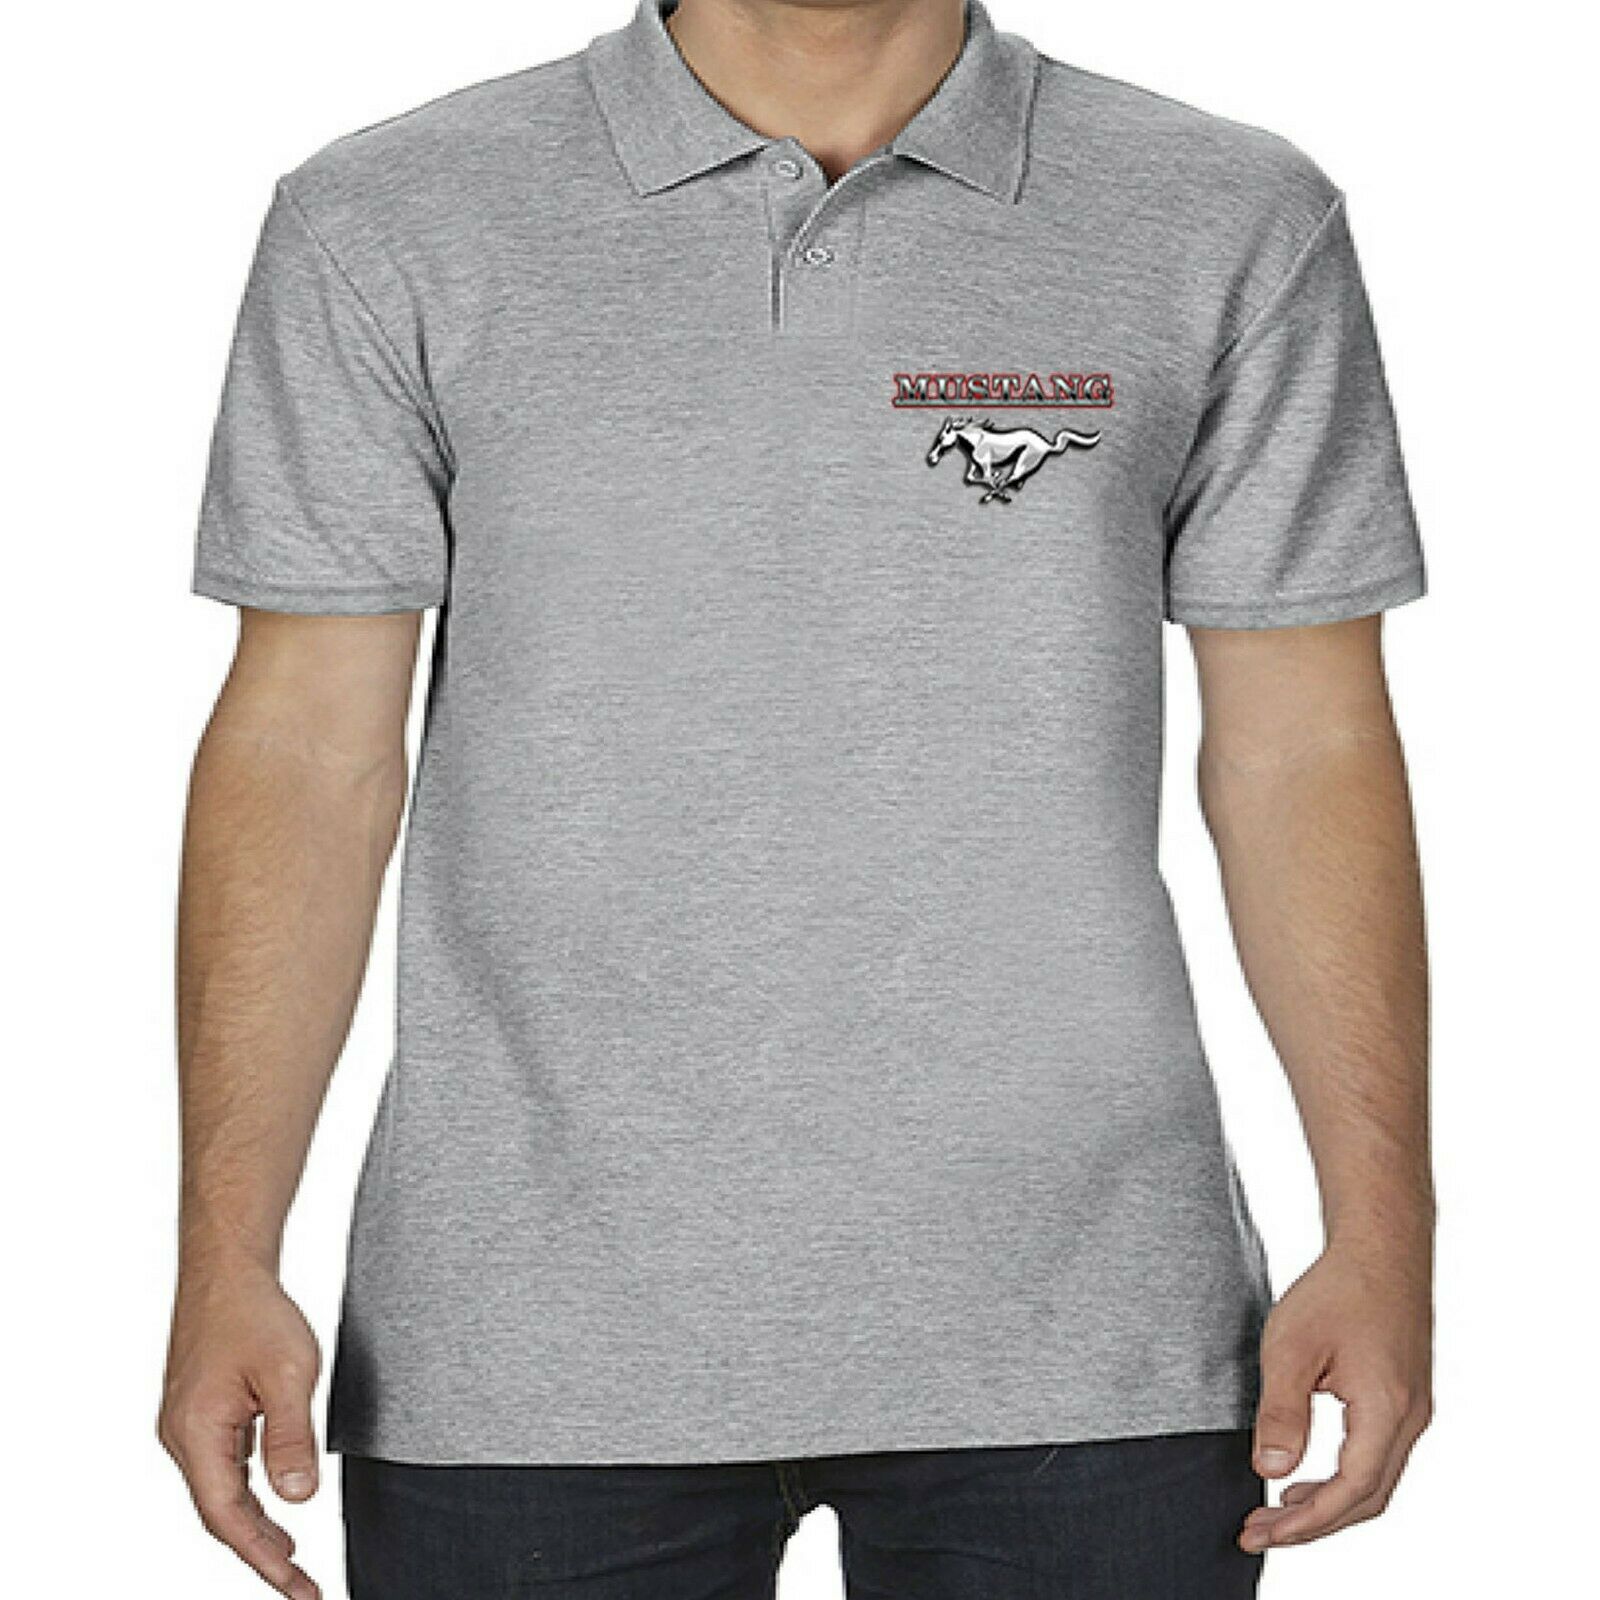 Mens Licensed Ford Mustang Polo Shirt American Classic Chairman V8  Muscle Car 